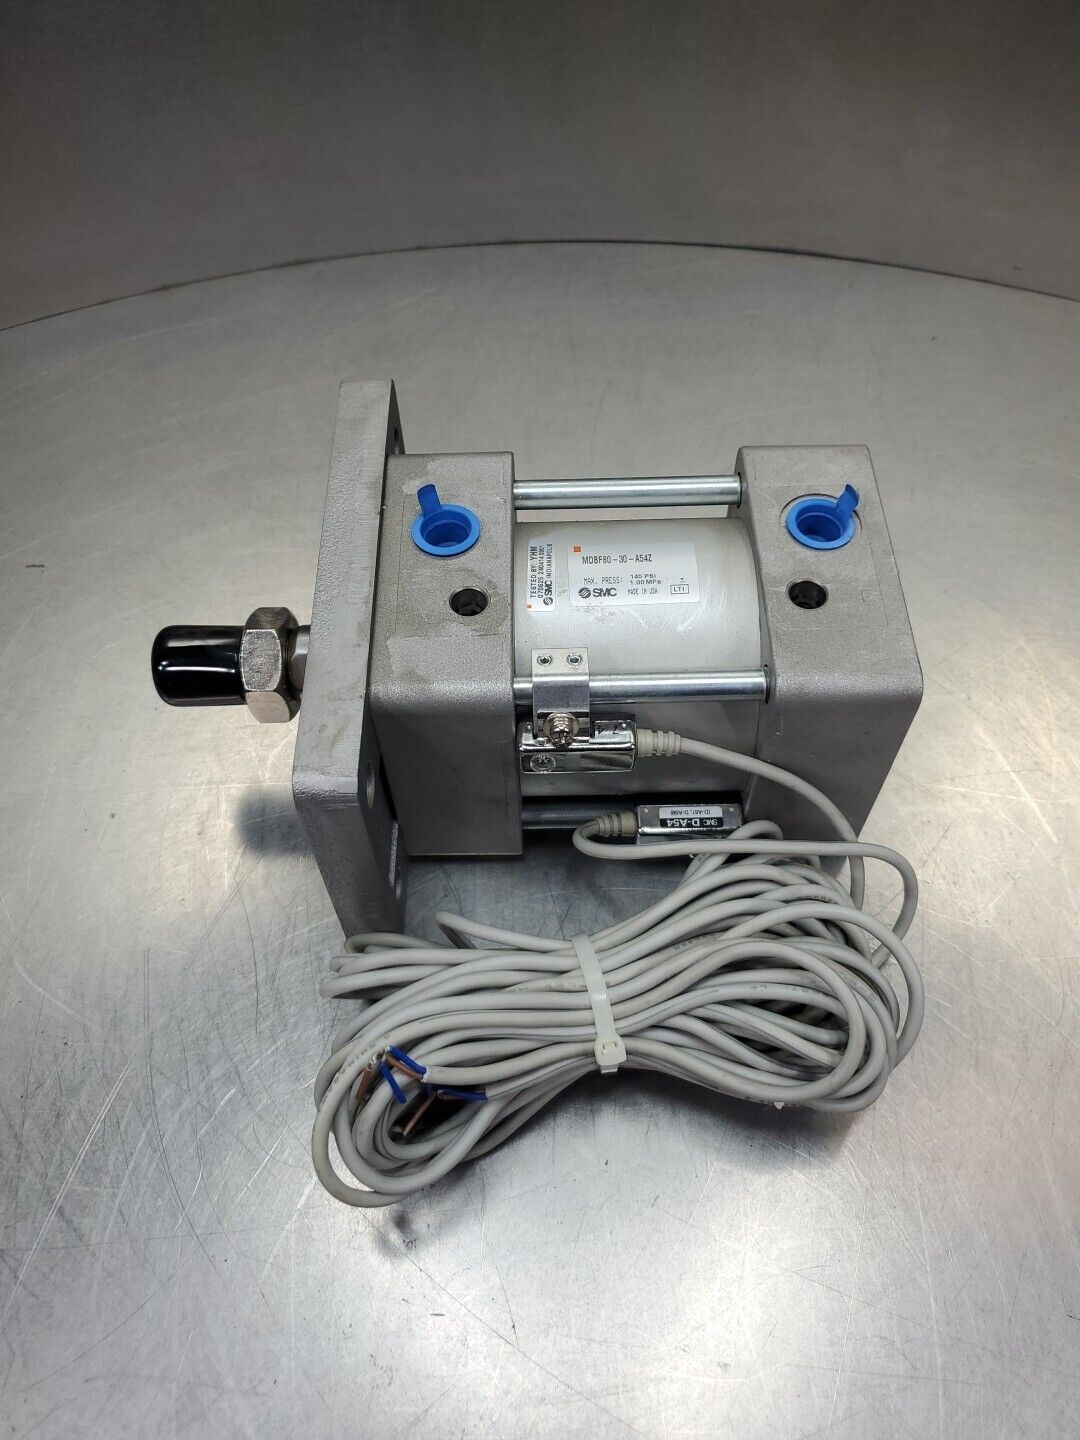 SMC MDBF80-30-A54Z Pneumatic Cylinder w/2 SMC D-A54 Reed Switches.         6C-14